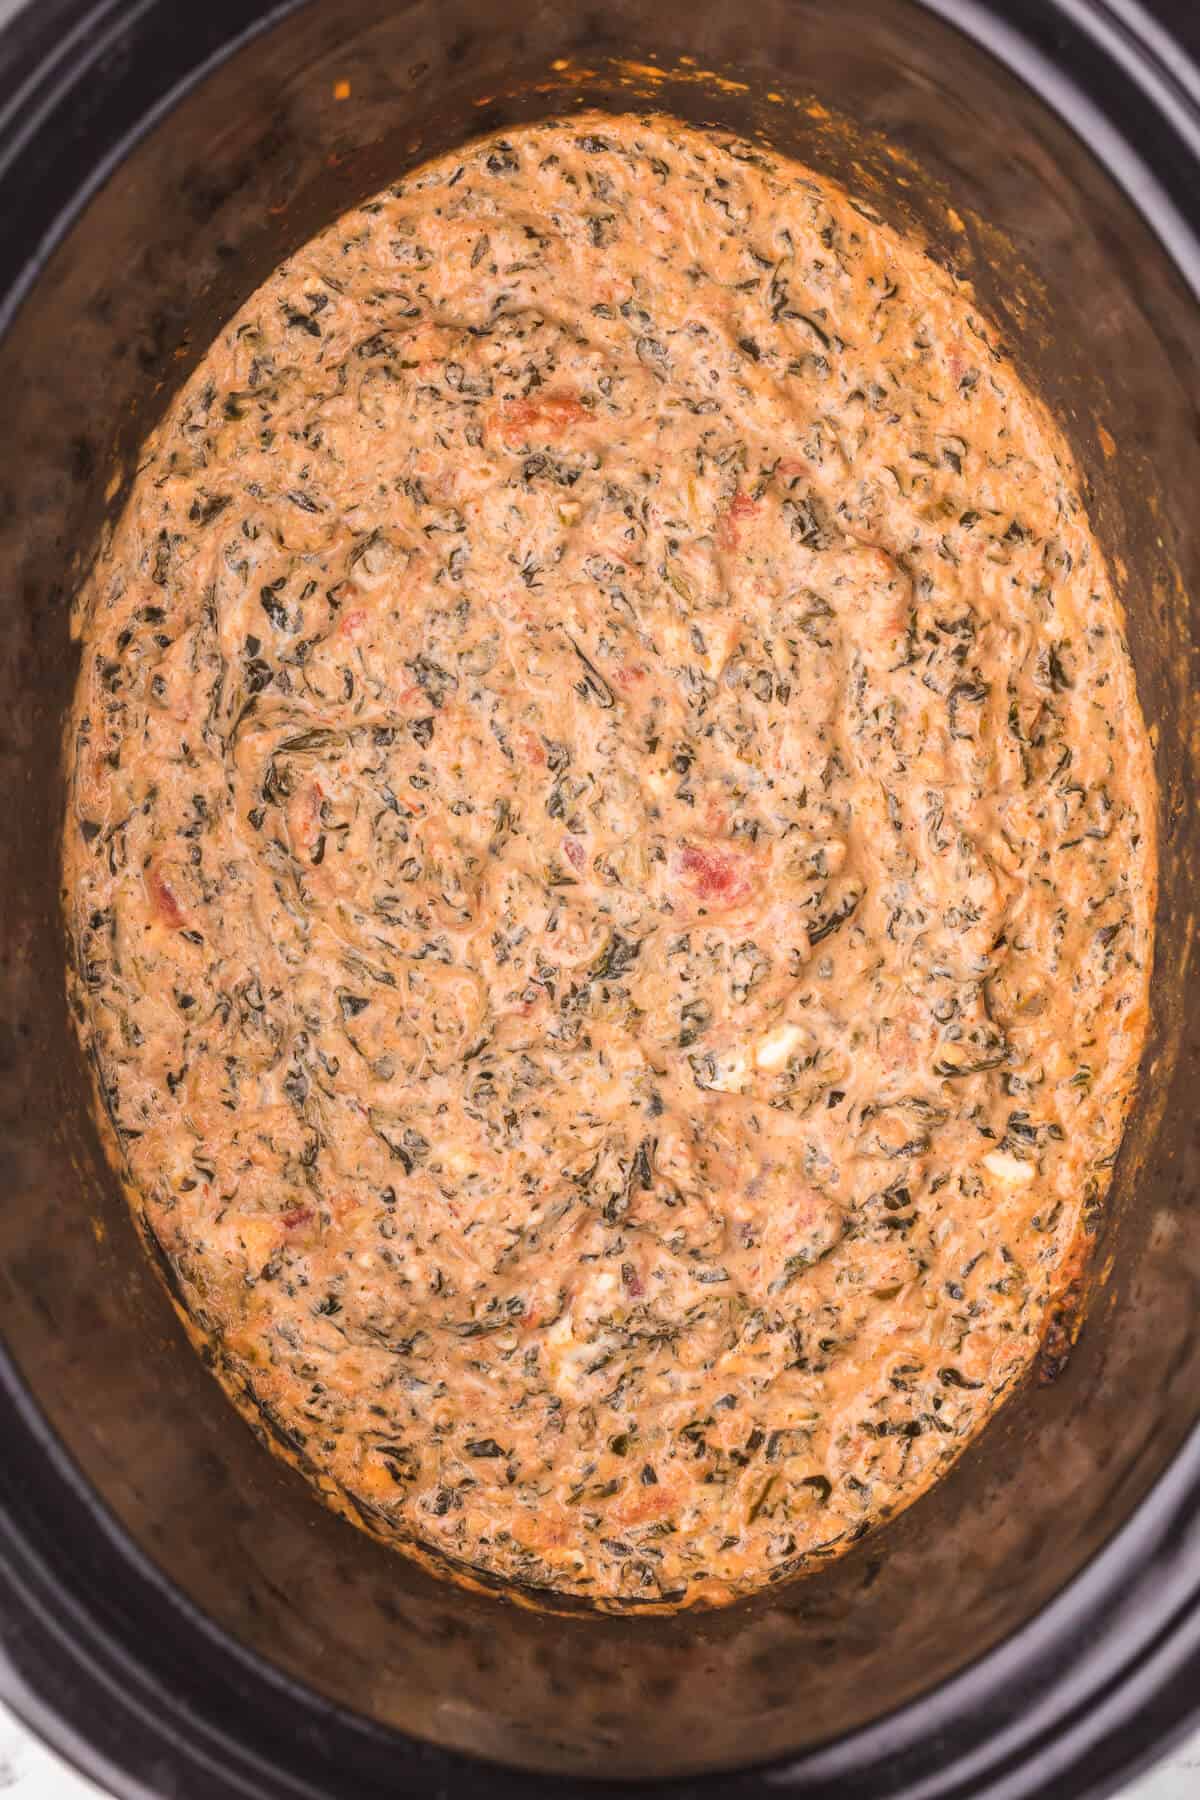 Tex-Mex Spinach Dip - Add a new kick to your classic spinach dip recipe! This appetizer is super creamy with just 5 ingredients. Just dump, heat, and serve.